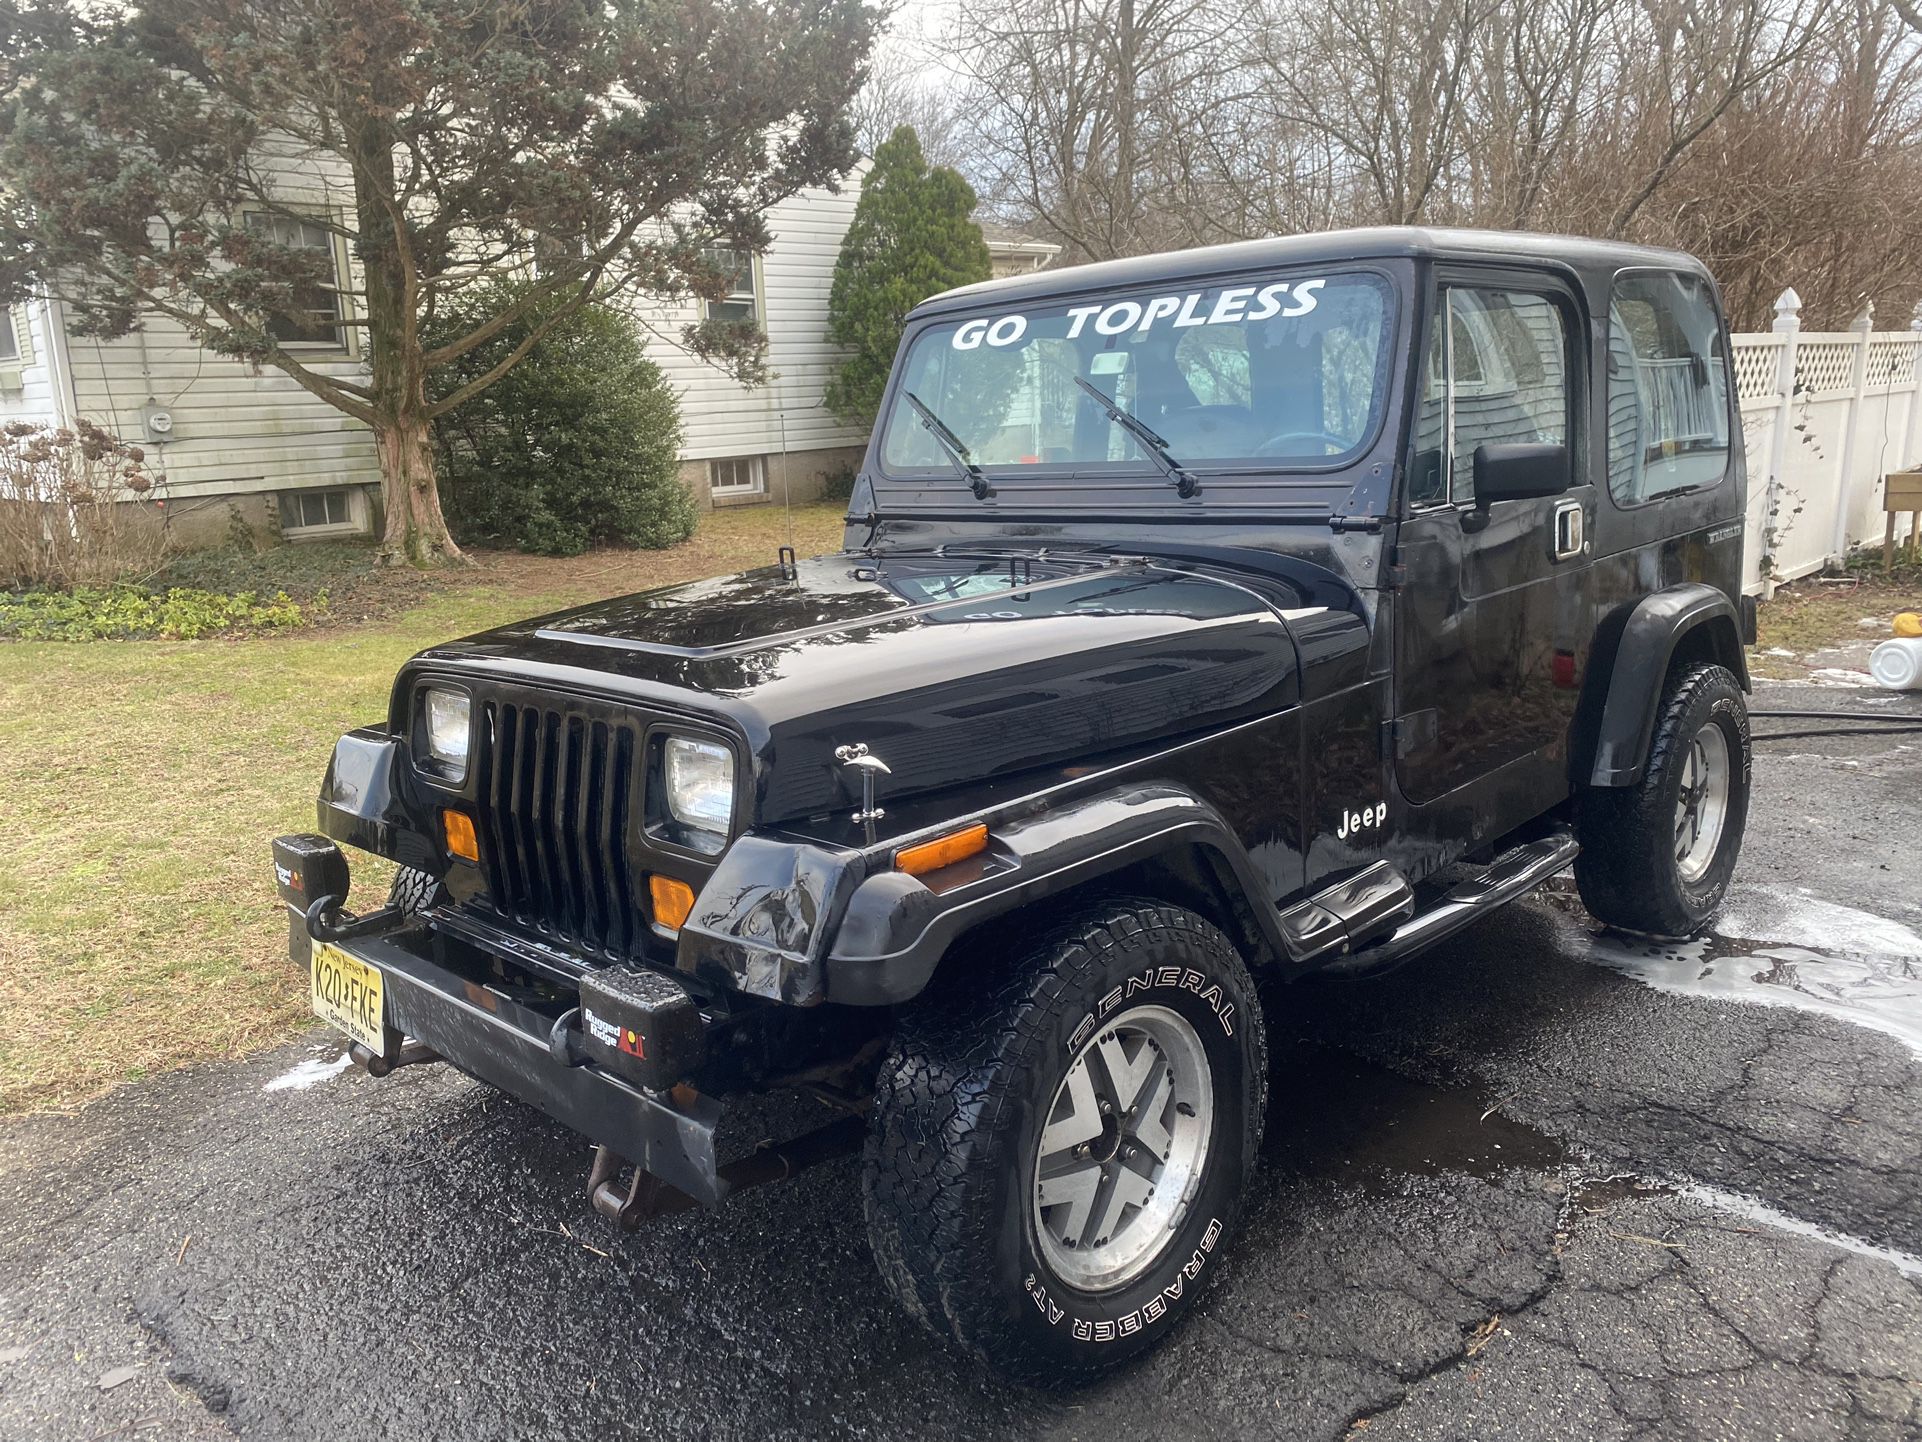 1989 Jeep Wrangler for Sale in Westwood, NJ - OfferUp